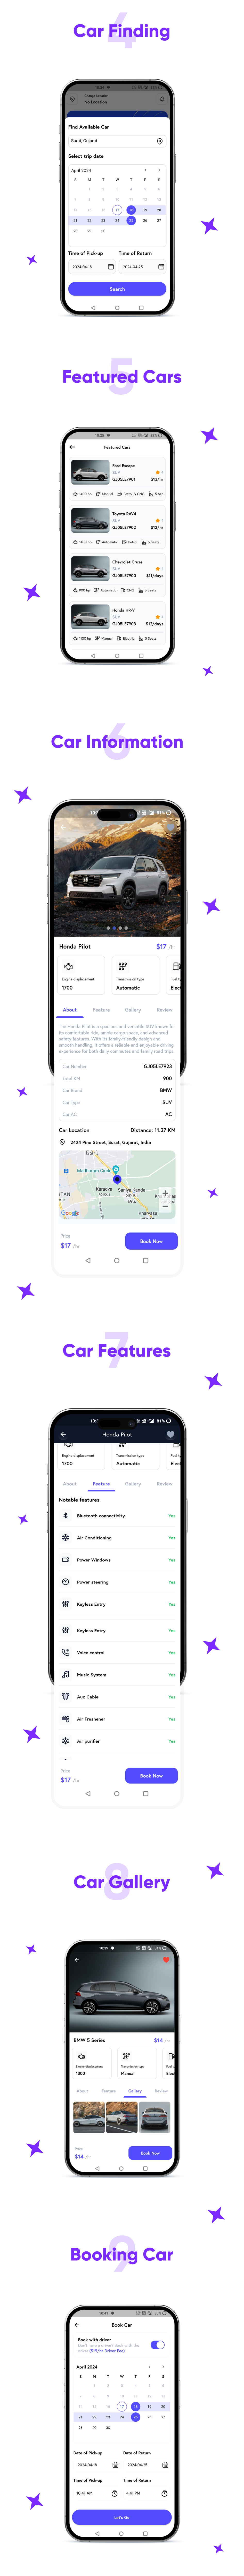 CarLink - Car Rental Booking App | Rent a Car | Taxi and Self Drive Car Renting | Complete Solution - 5